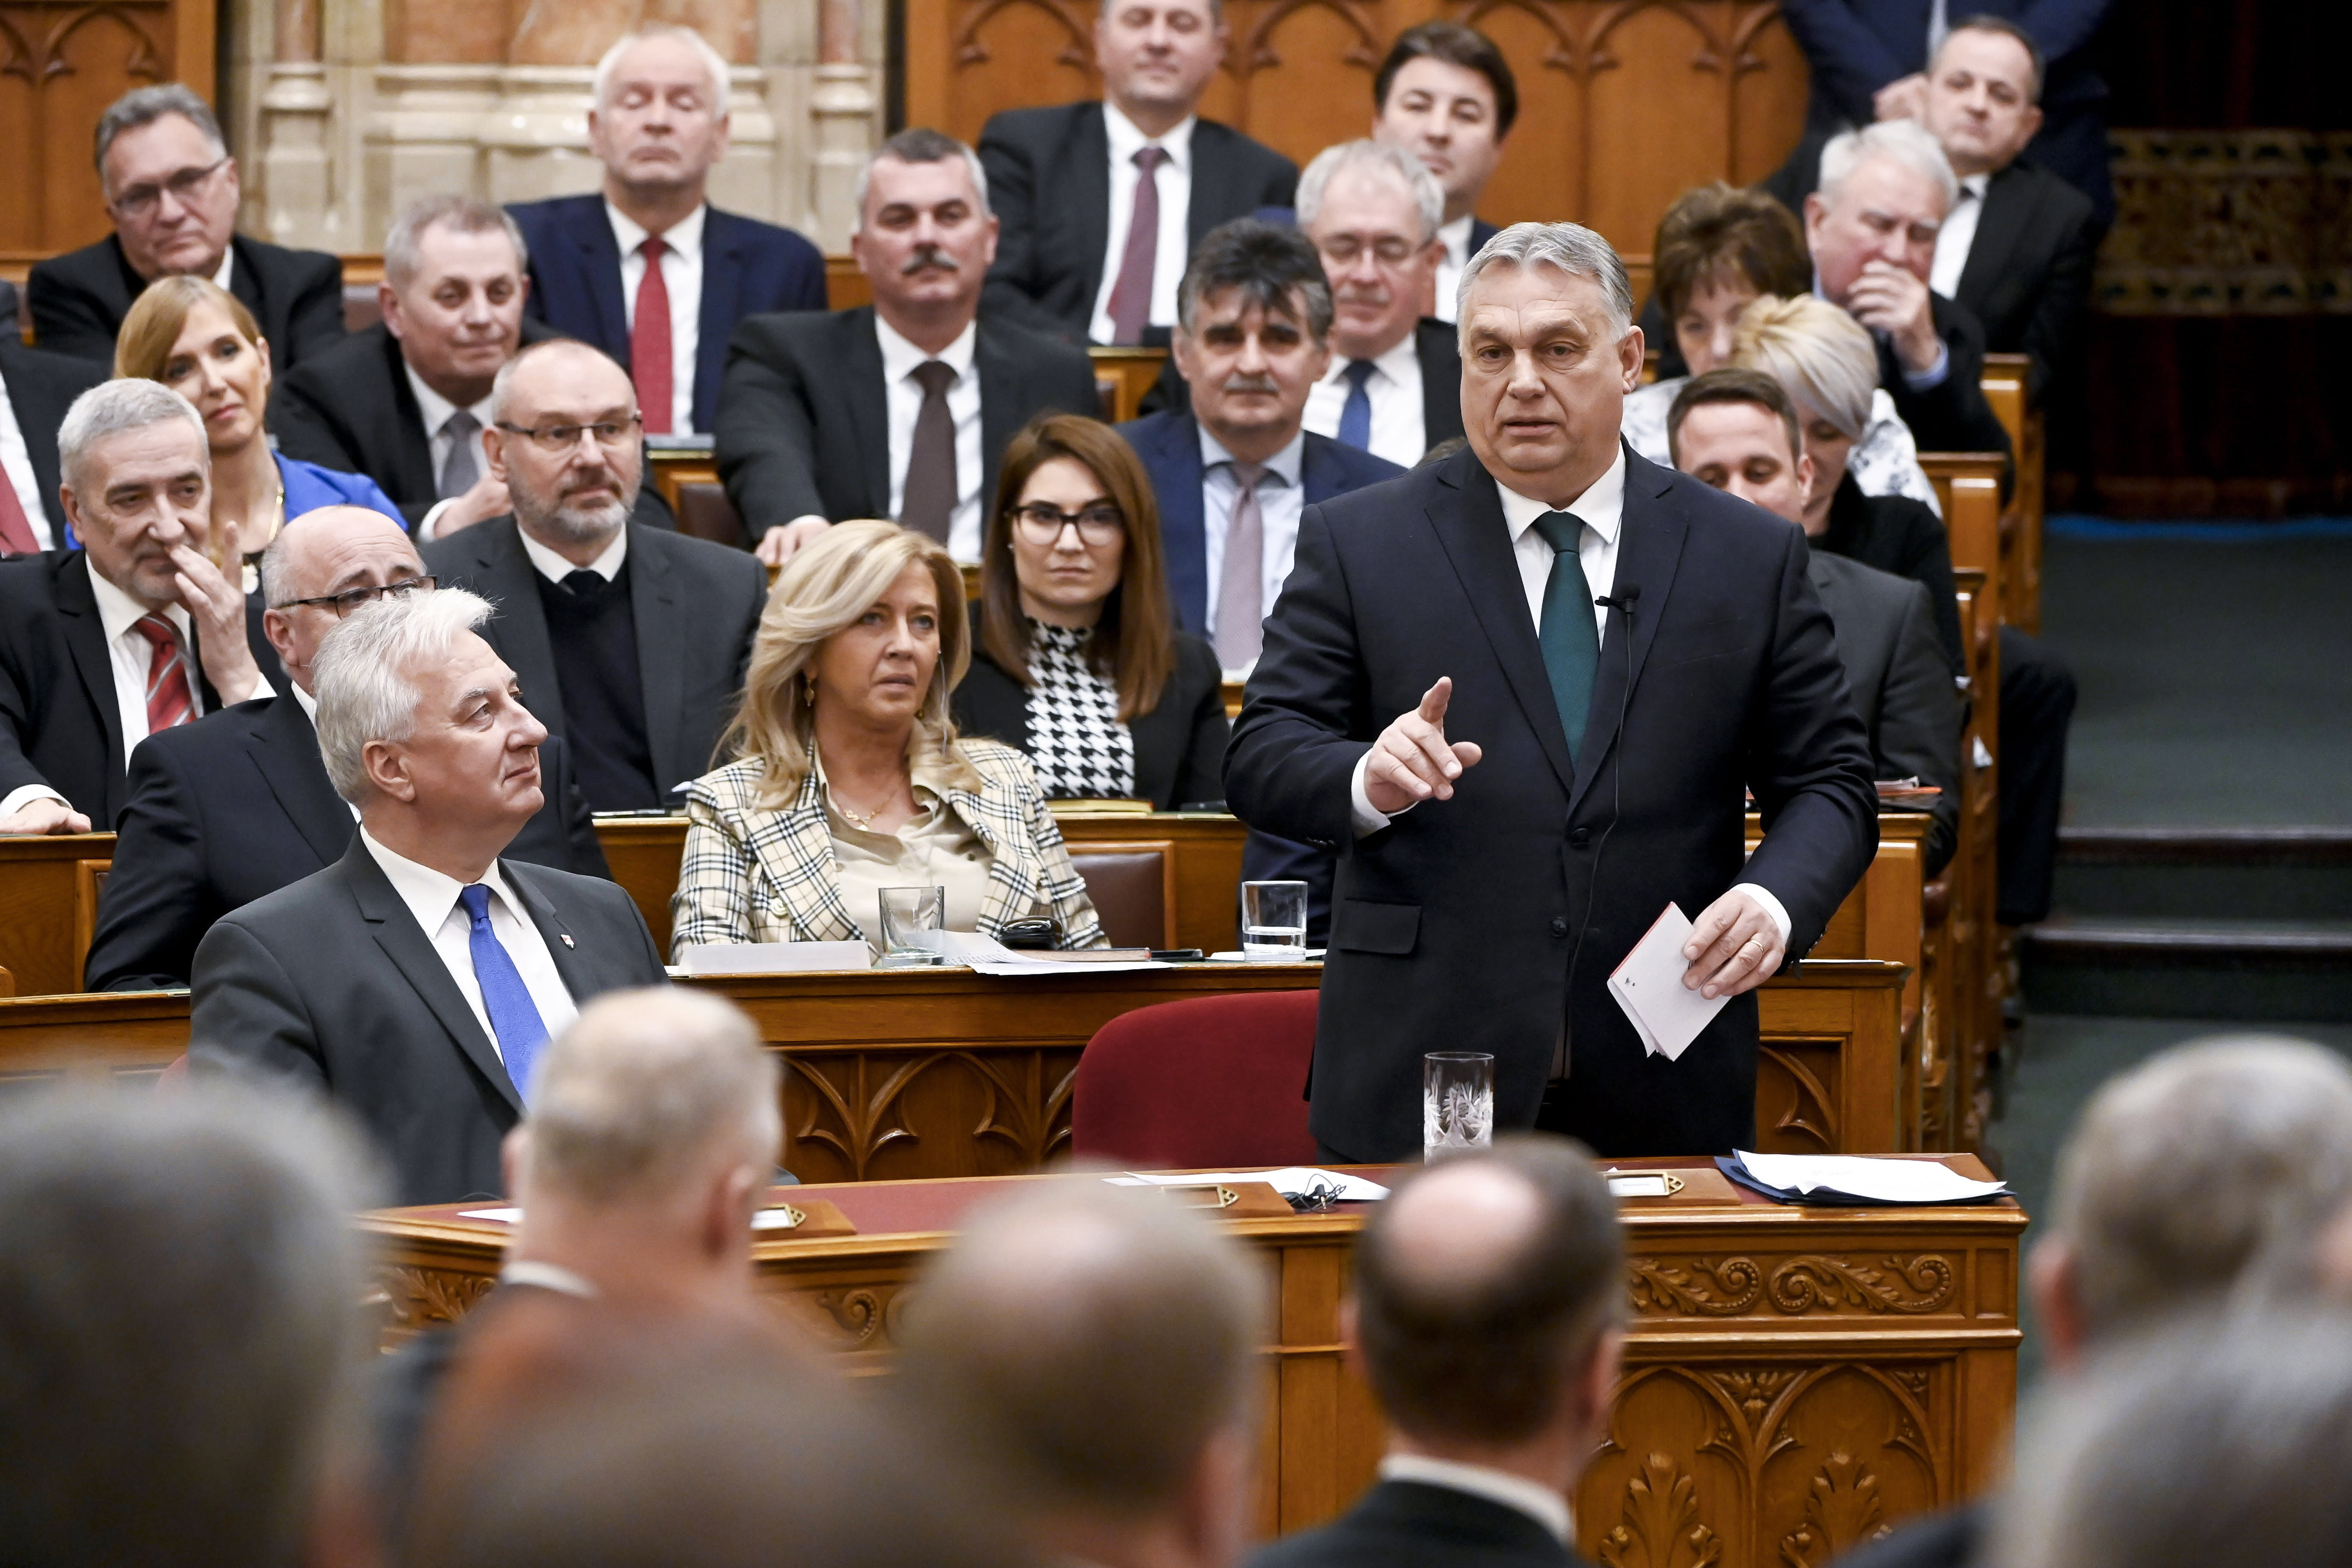 Fidesz: Hungary accepts Finland’s NATO application on March 27